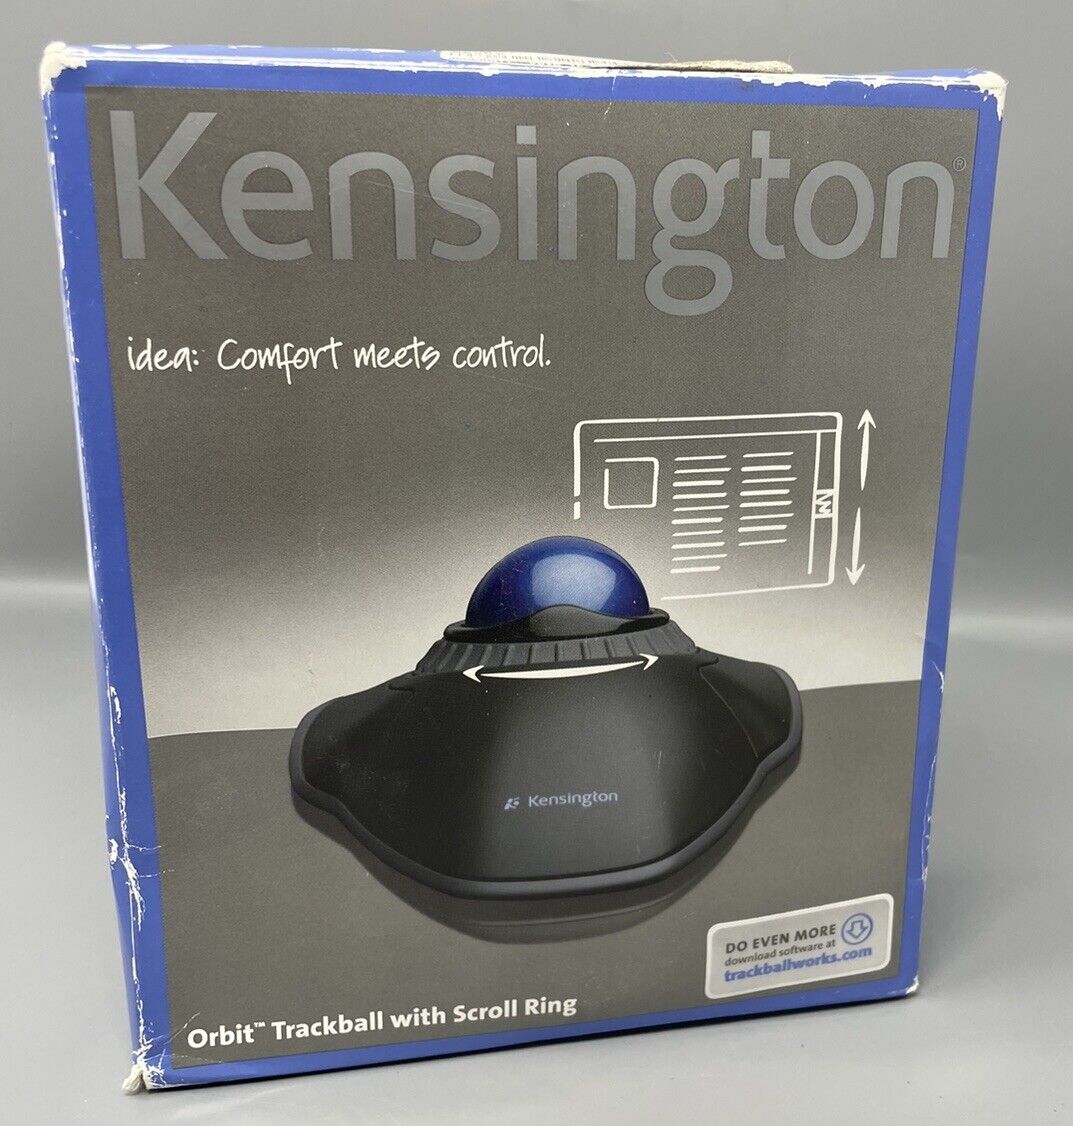 Kensington Wired Orbit Trackball Mouse with Scroll Ring Wrist Rest K72337